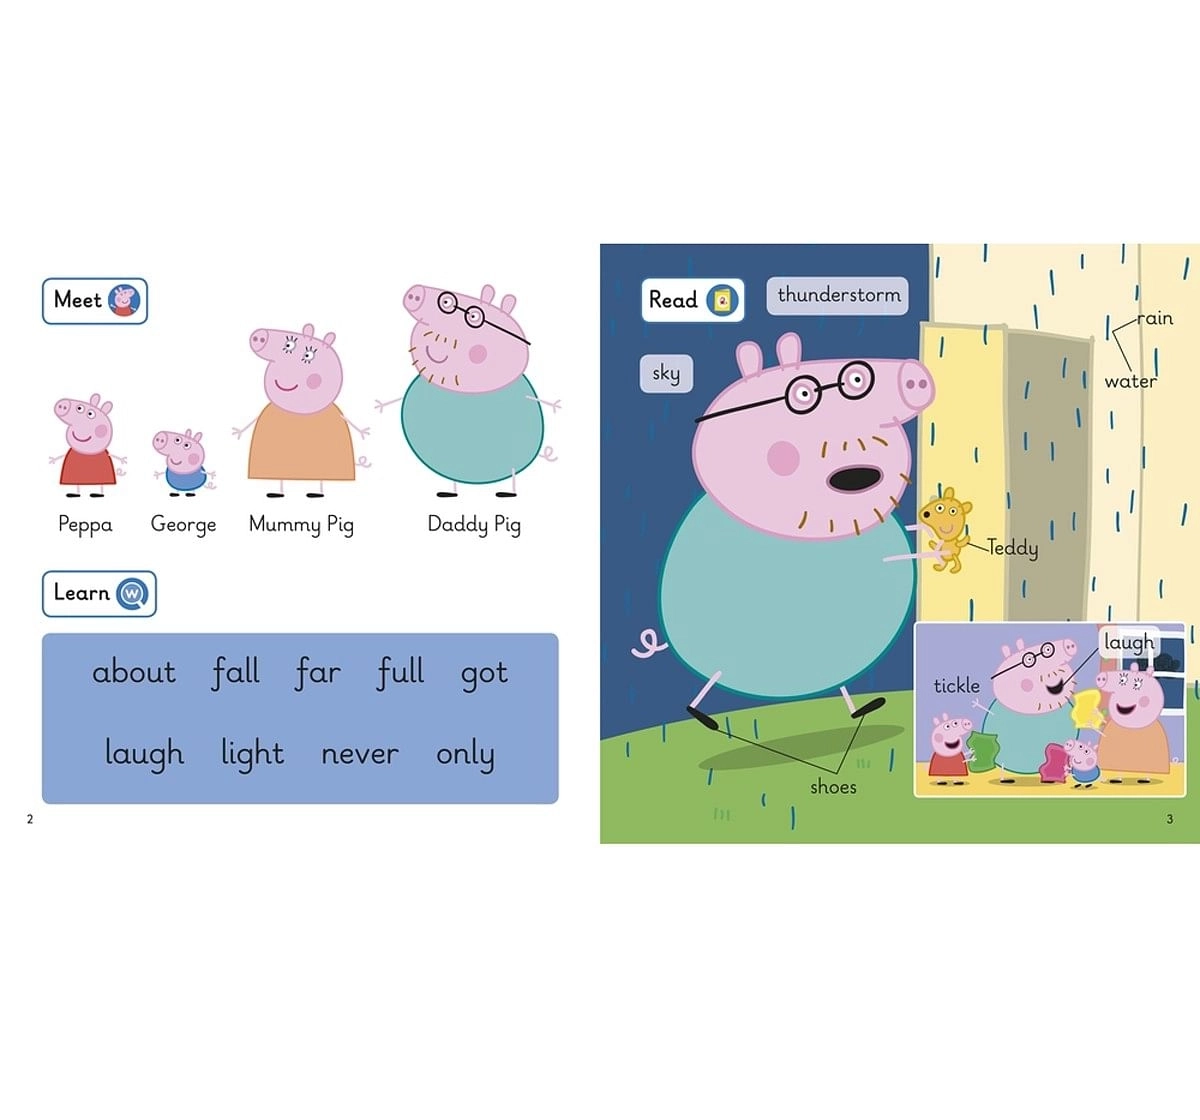 Penguin Random House First Words with Peppa Level 5: The Thunderstorm Paper cover Multicolour 5Y+